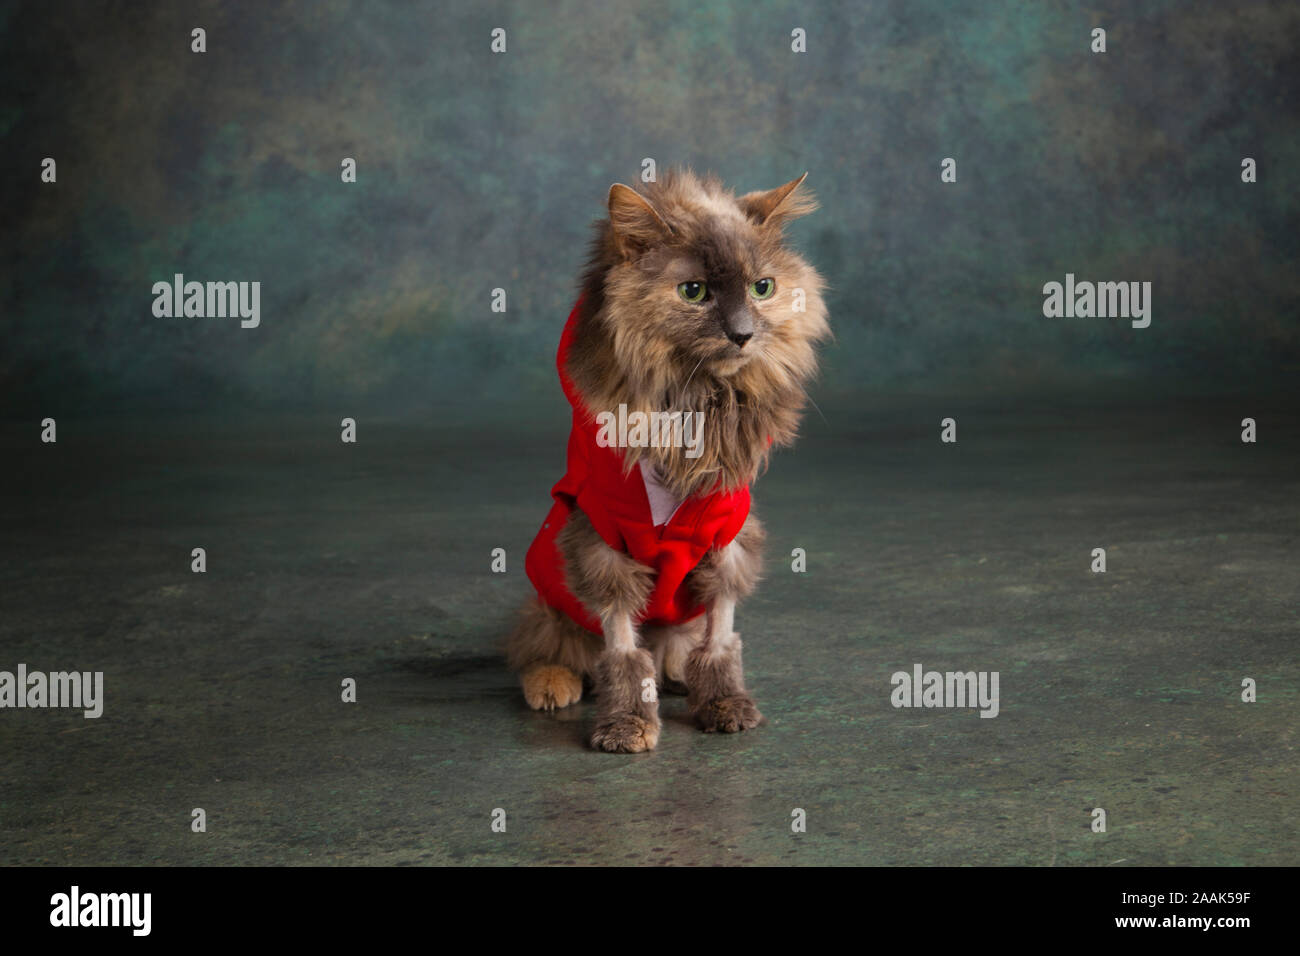 Studio shot of Long haired cat wearing red vest Banque D'Images